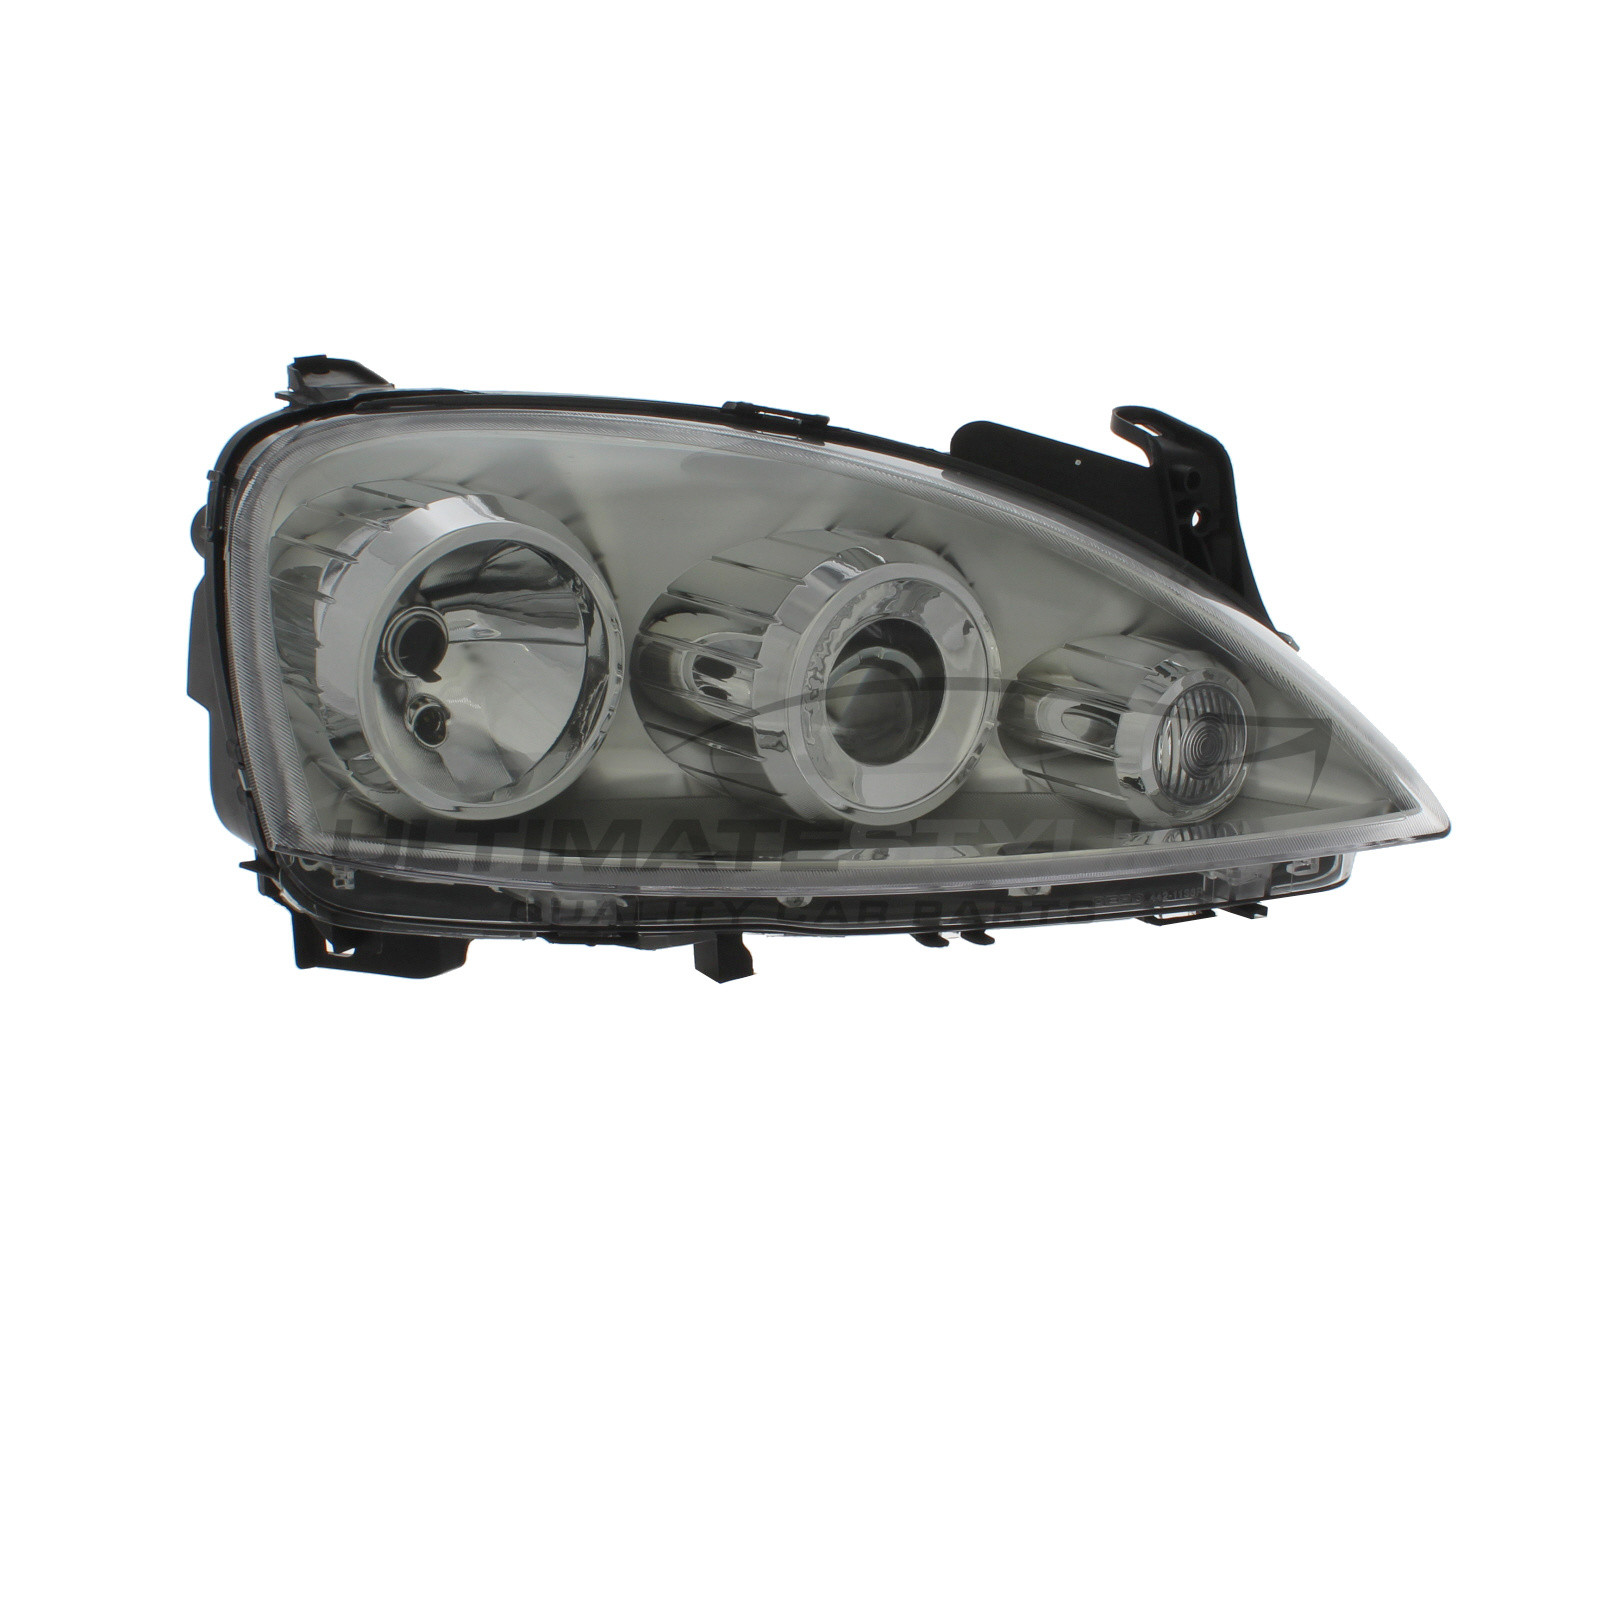 Vauxhall Corsa 2003-2006 Halogen, Electric Without Motor, Chrome Headlight / Headlamp (Projector Type - 3 Pod) Drivers Side (RH)